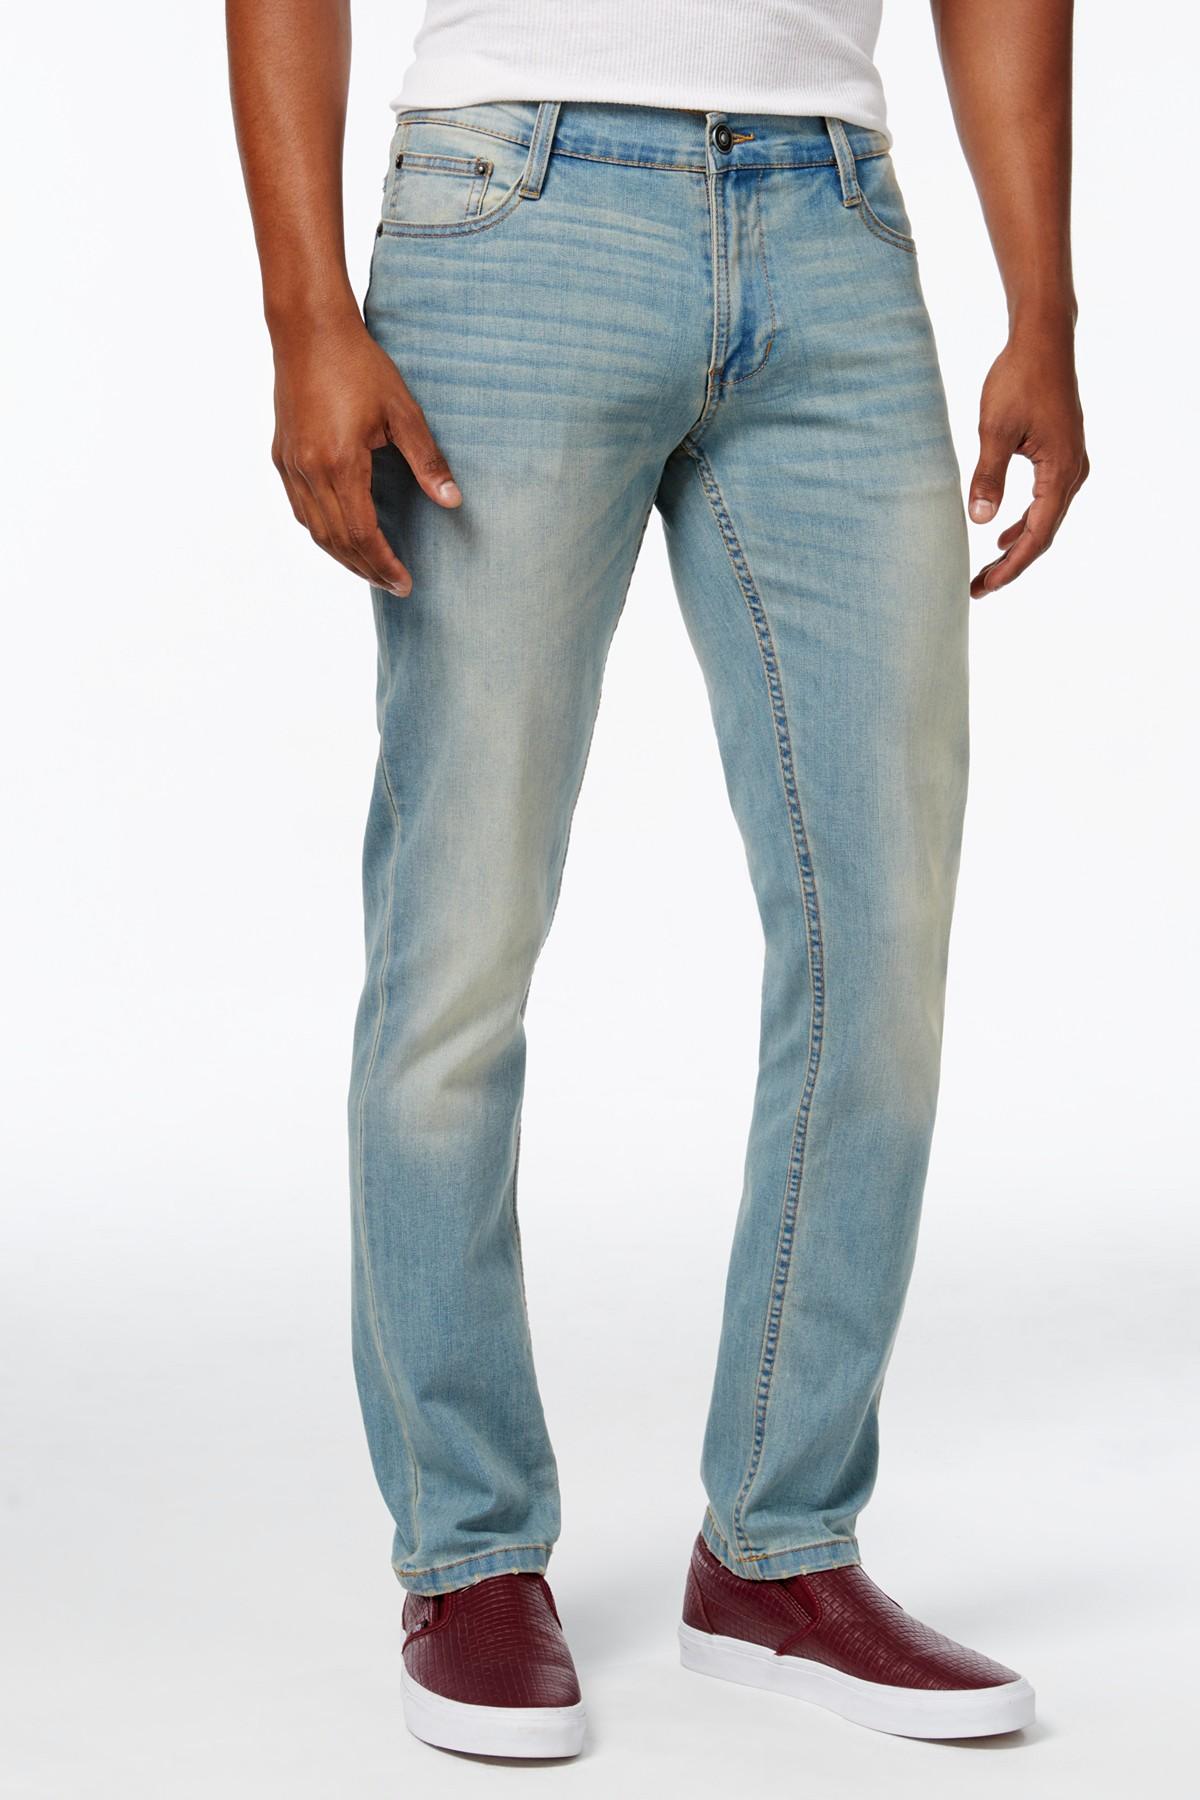 Ring of Fire Blue-Stone Slim-Fit Honor Jeans – CheapUndies